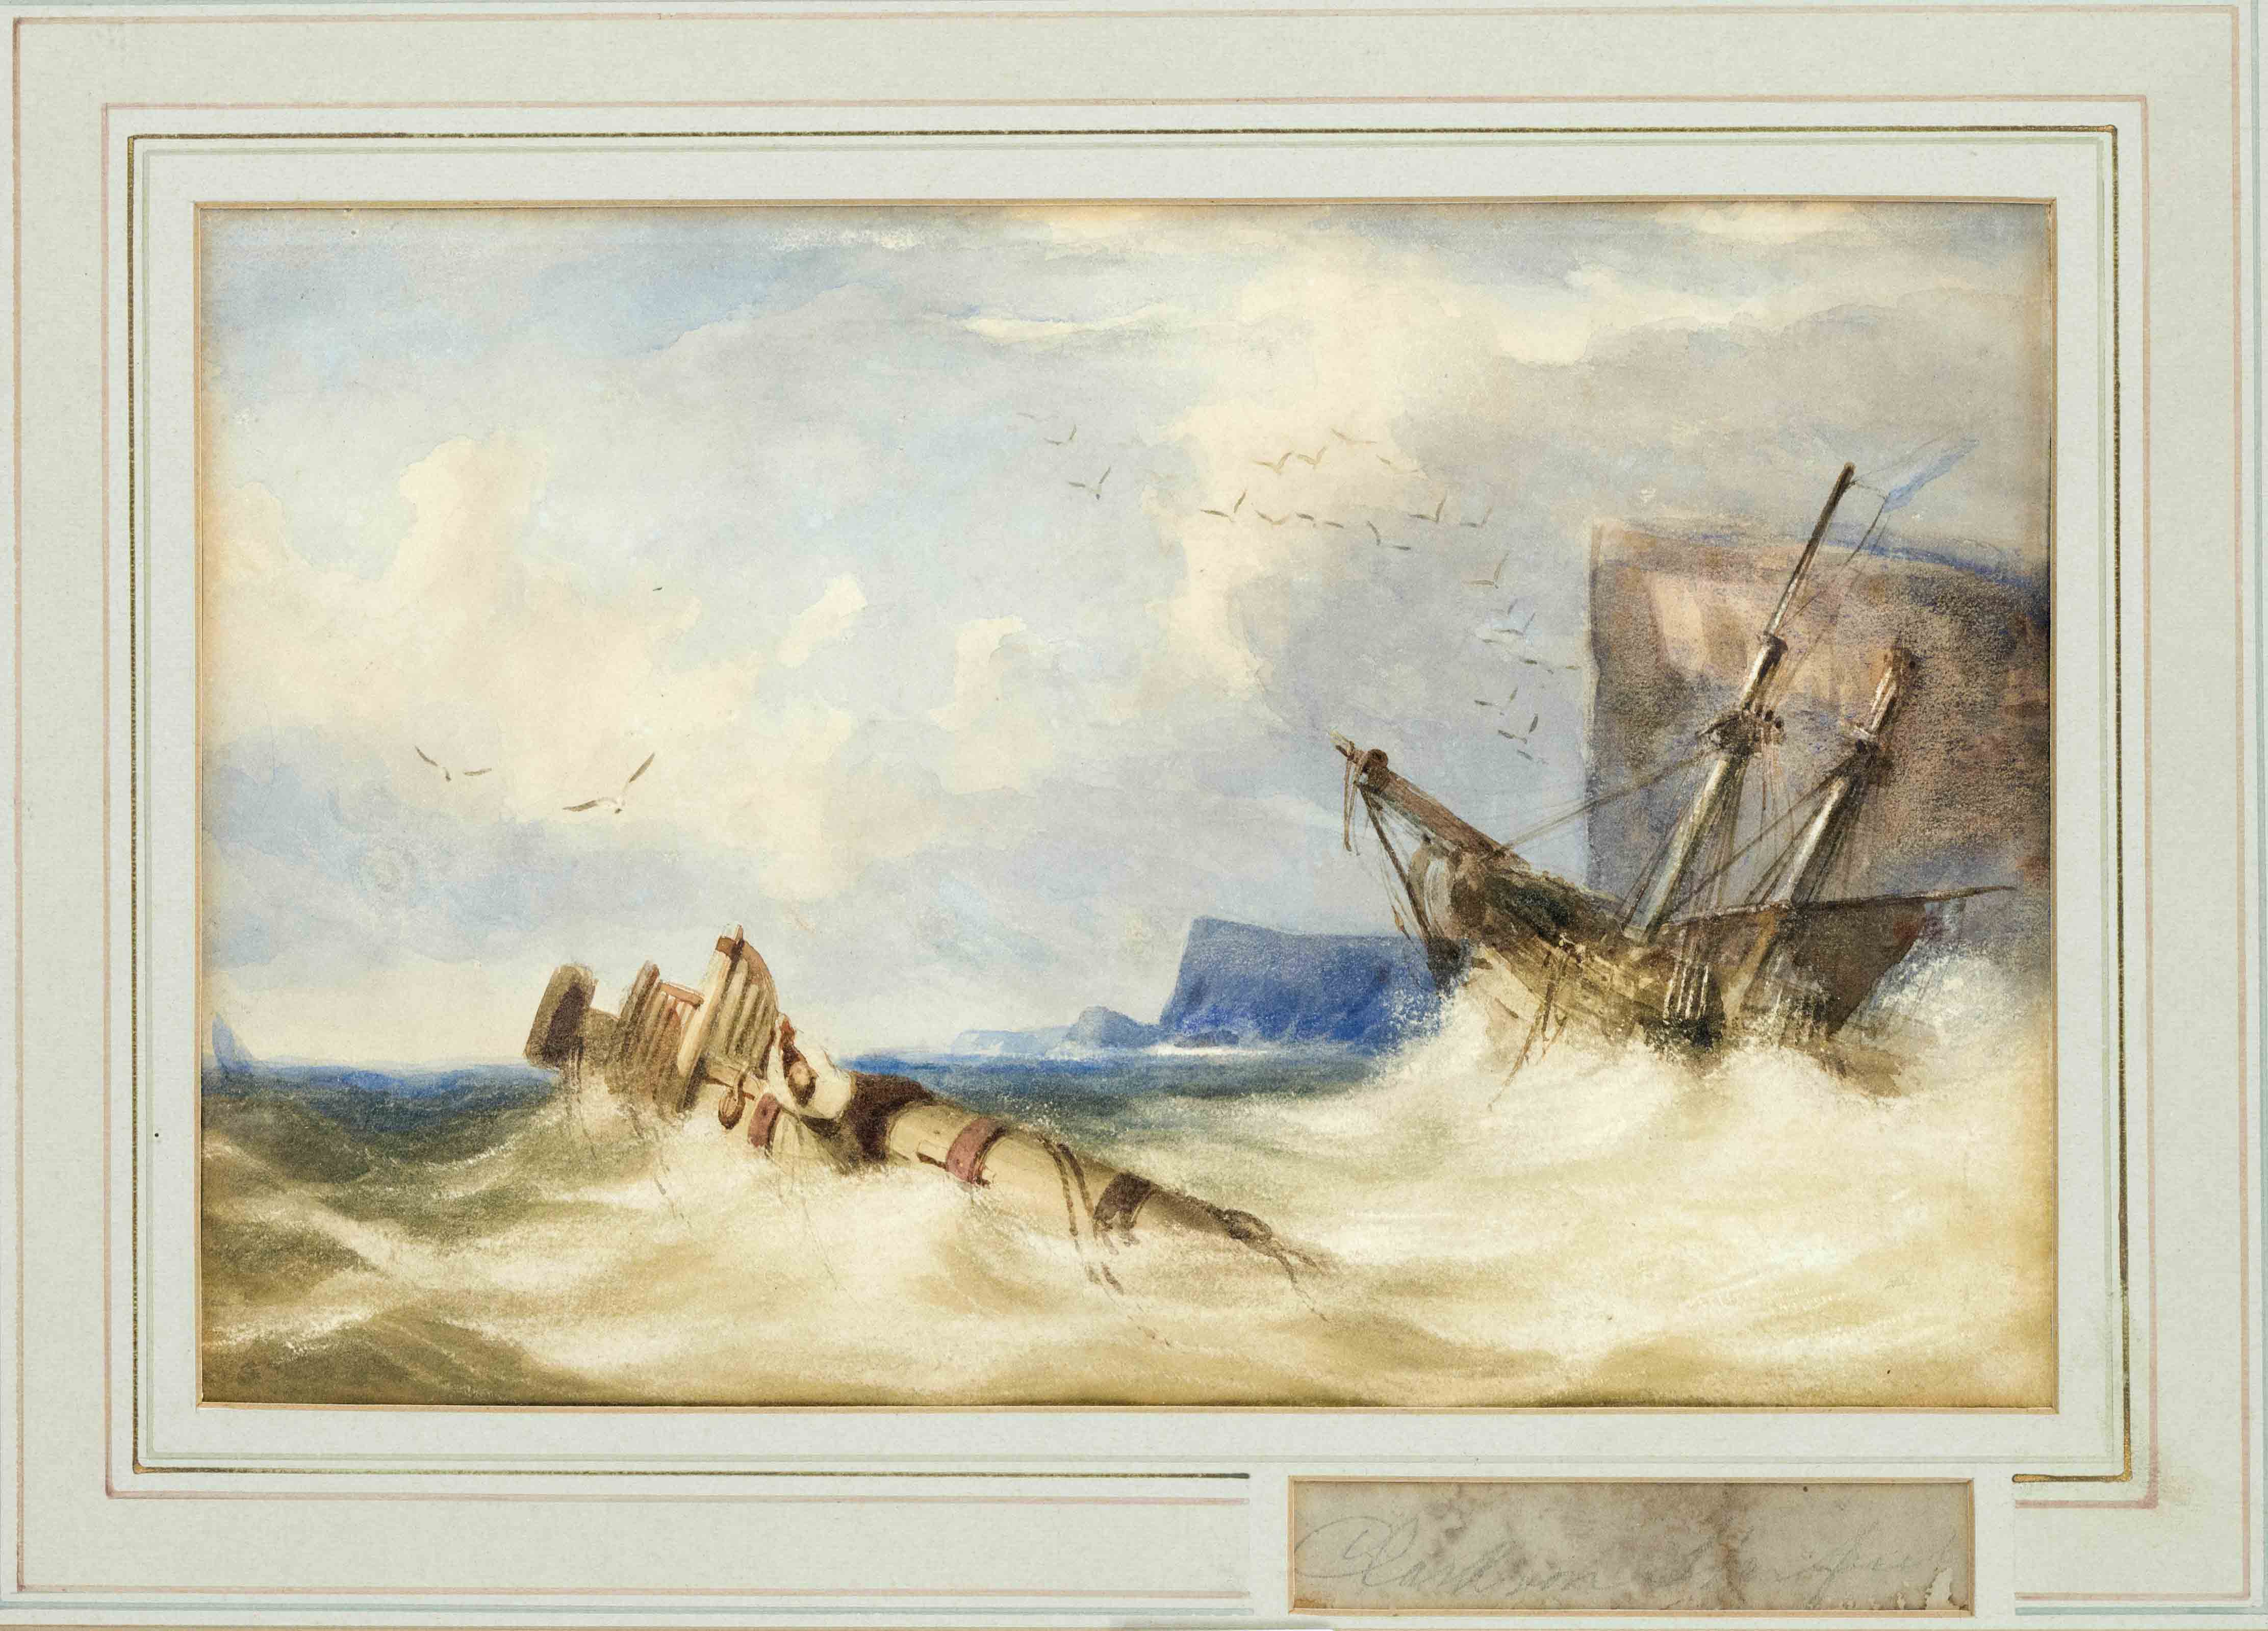 William Clarkson Stanfield (1793-1867), Shipwreck in front of a Steep Coast, watercolor on paper,